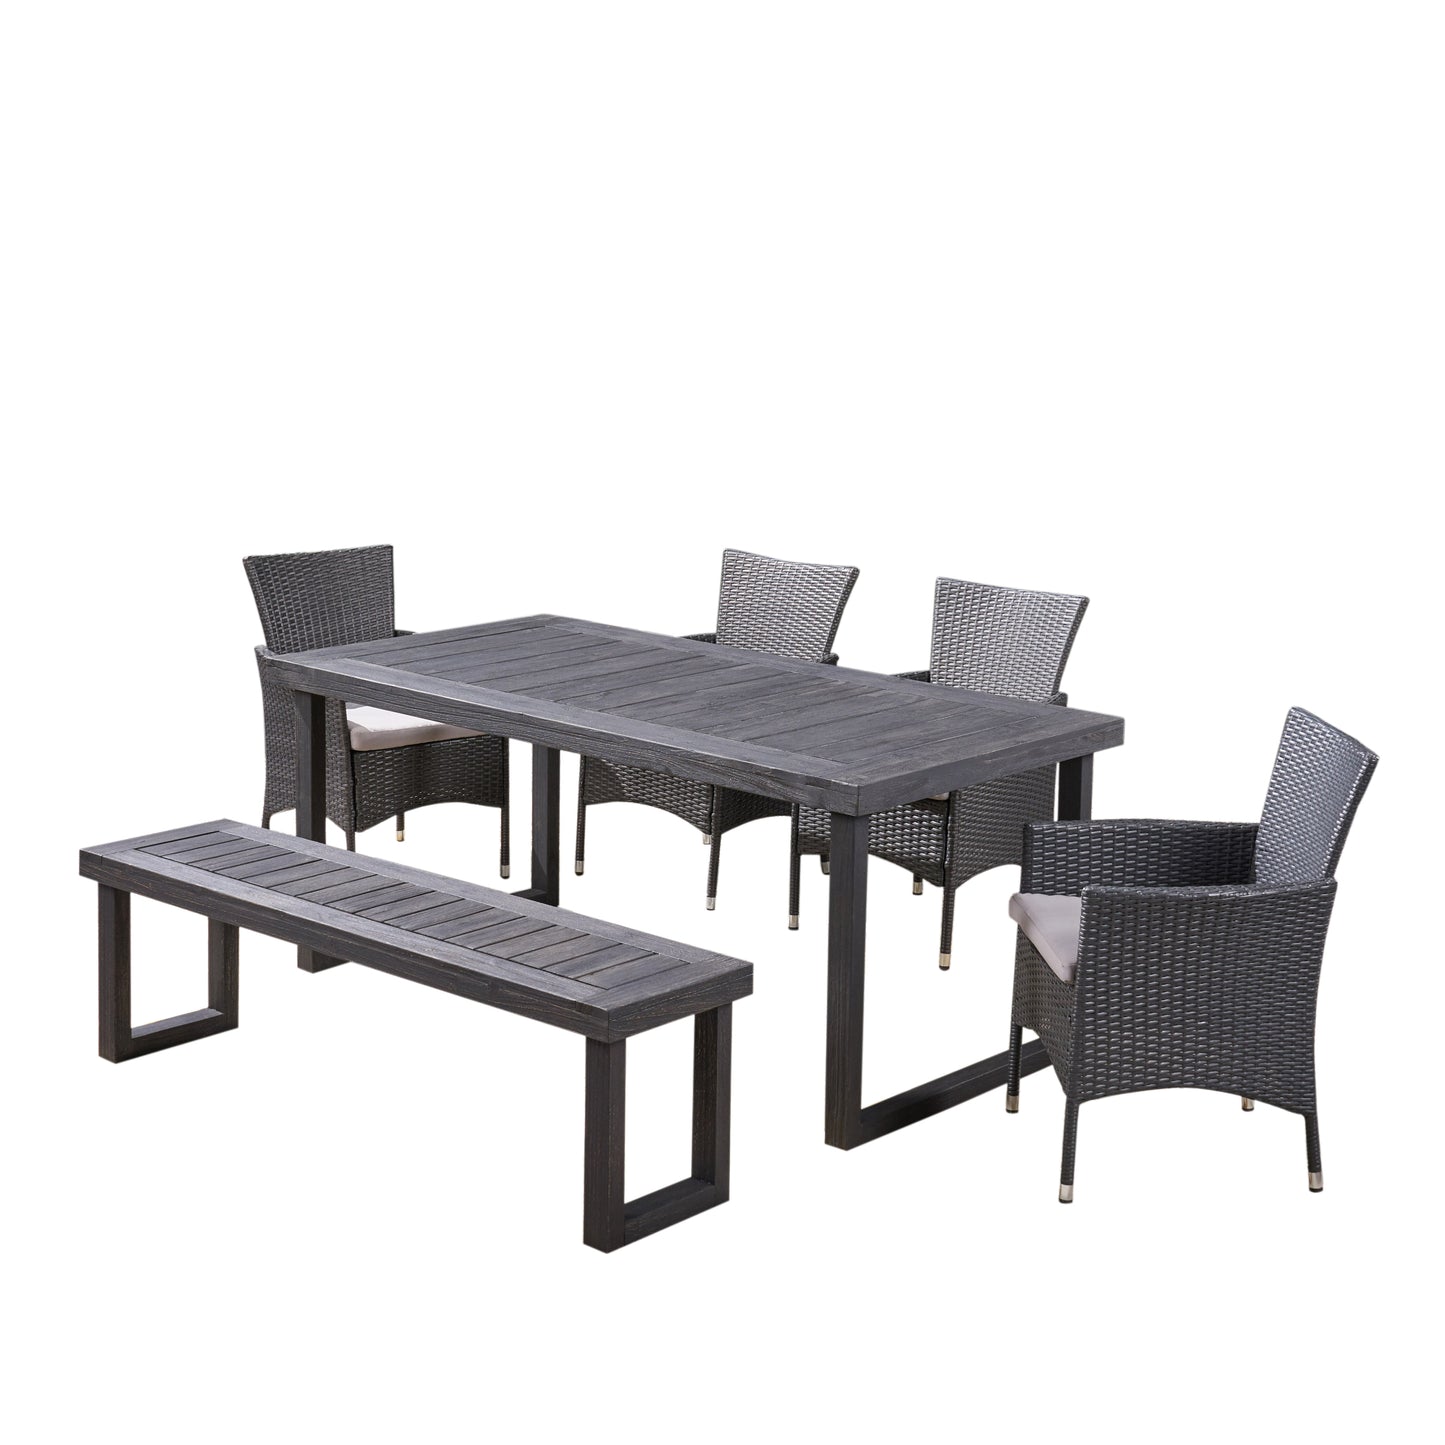 Agnes Outdoor 6-Seater Wood and Wicker Chair and Bench Dining Set